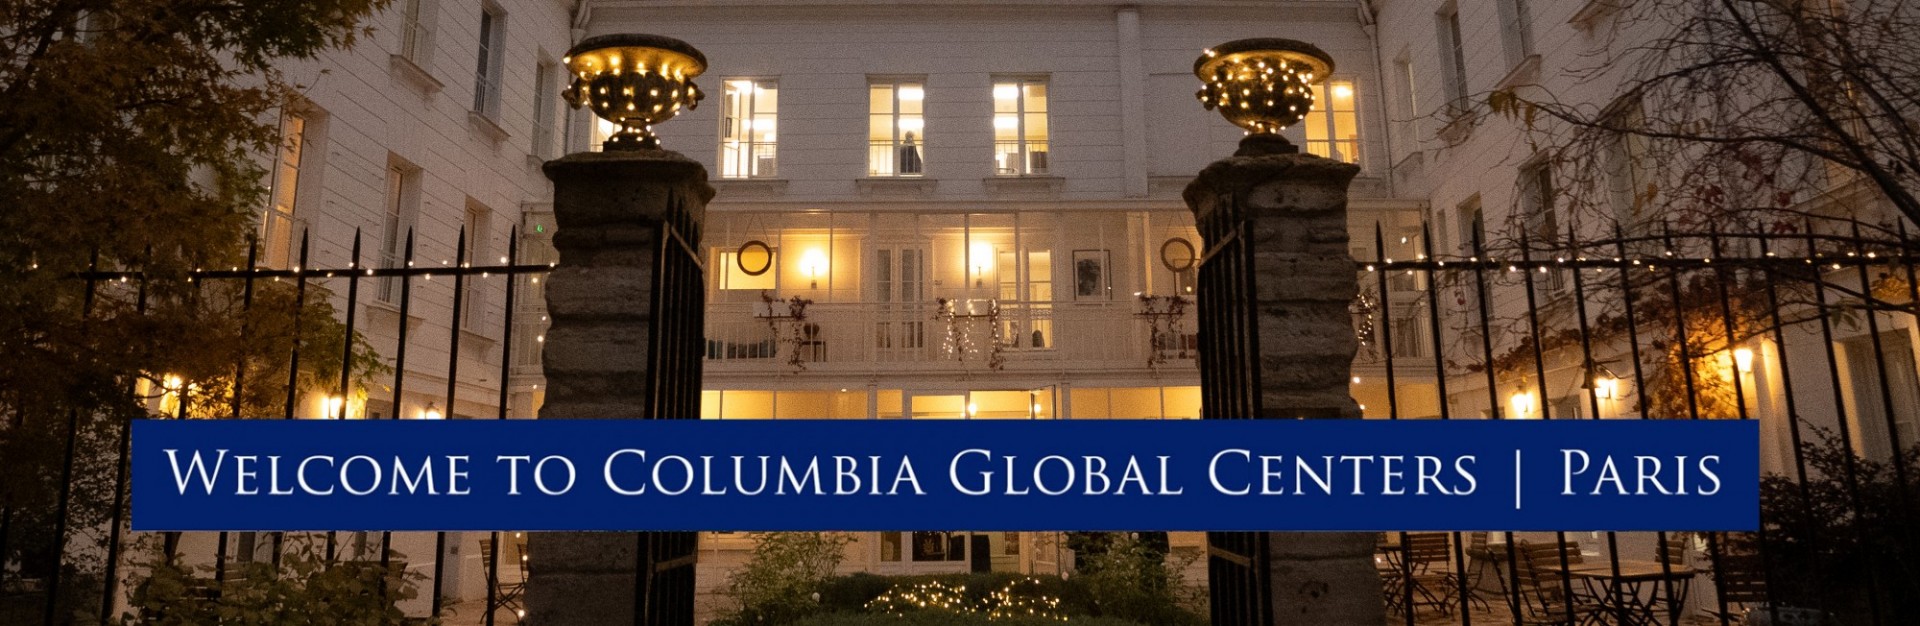 Welcome to Columbia Global Centers | Paris